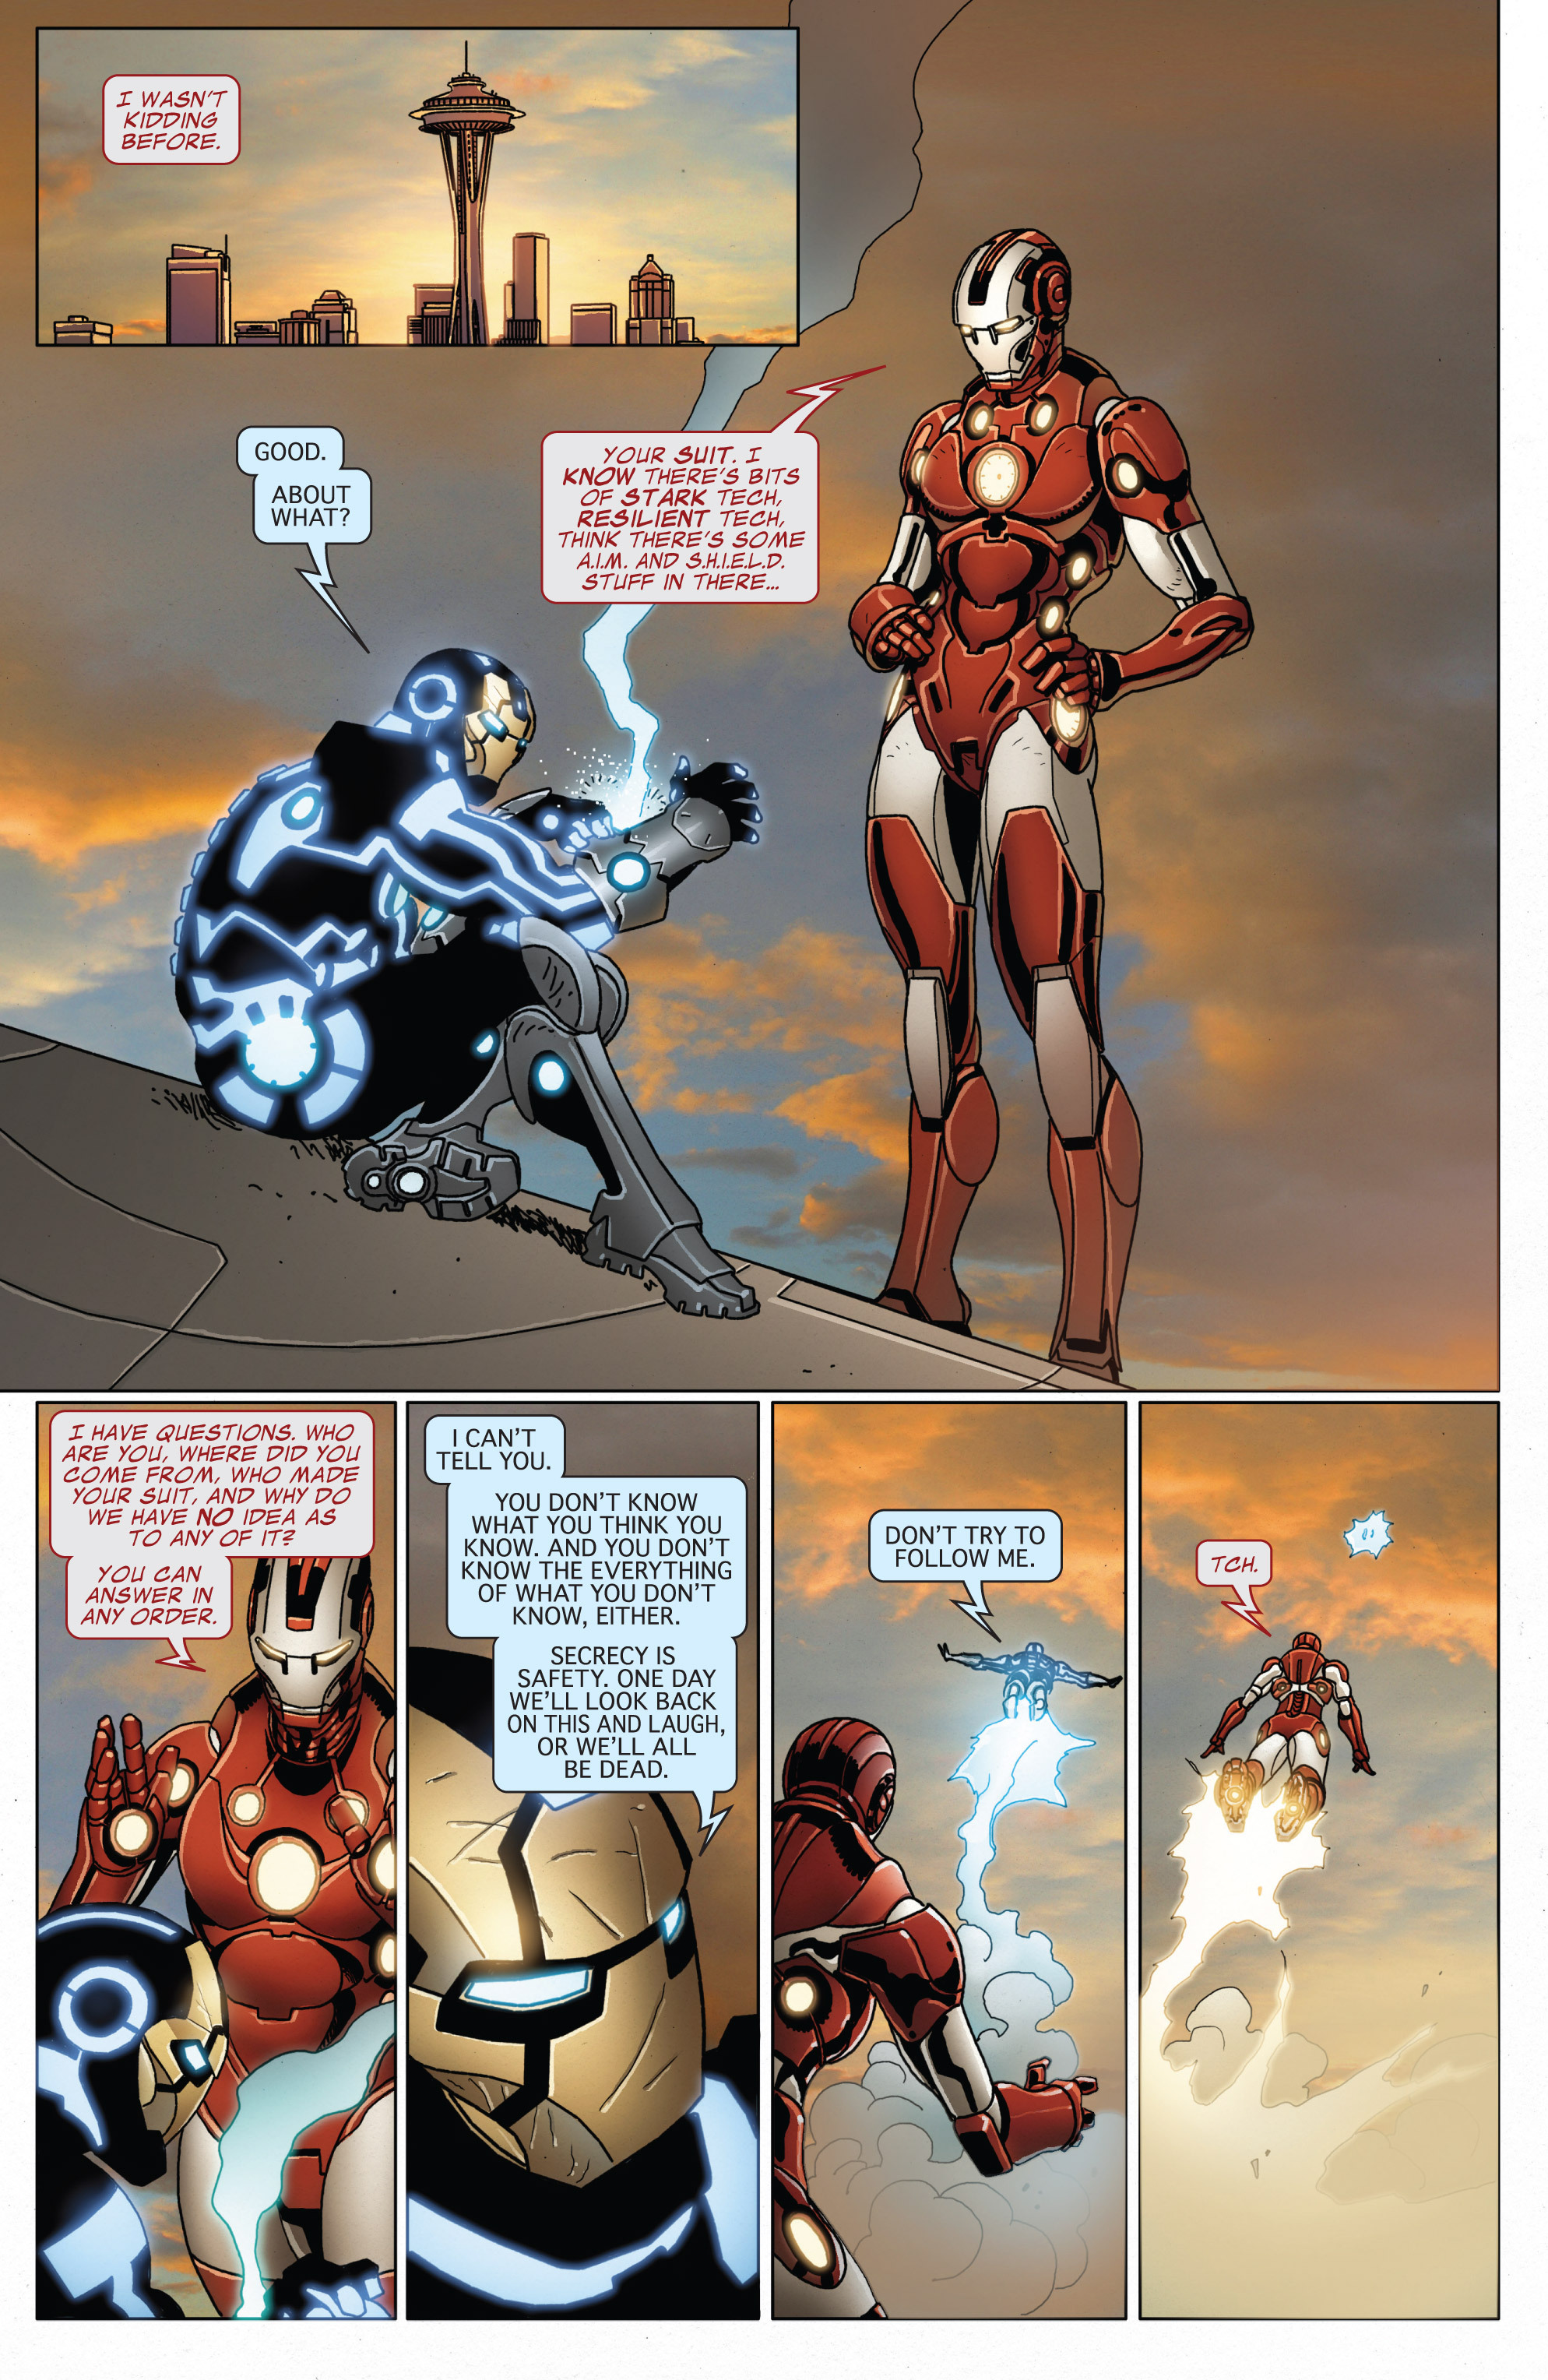 Invincible Iron Man (2008) 522 Page 19